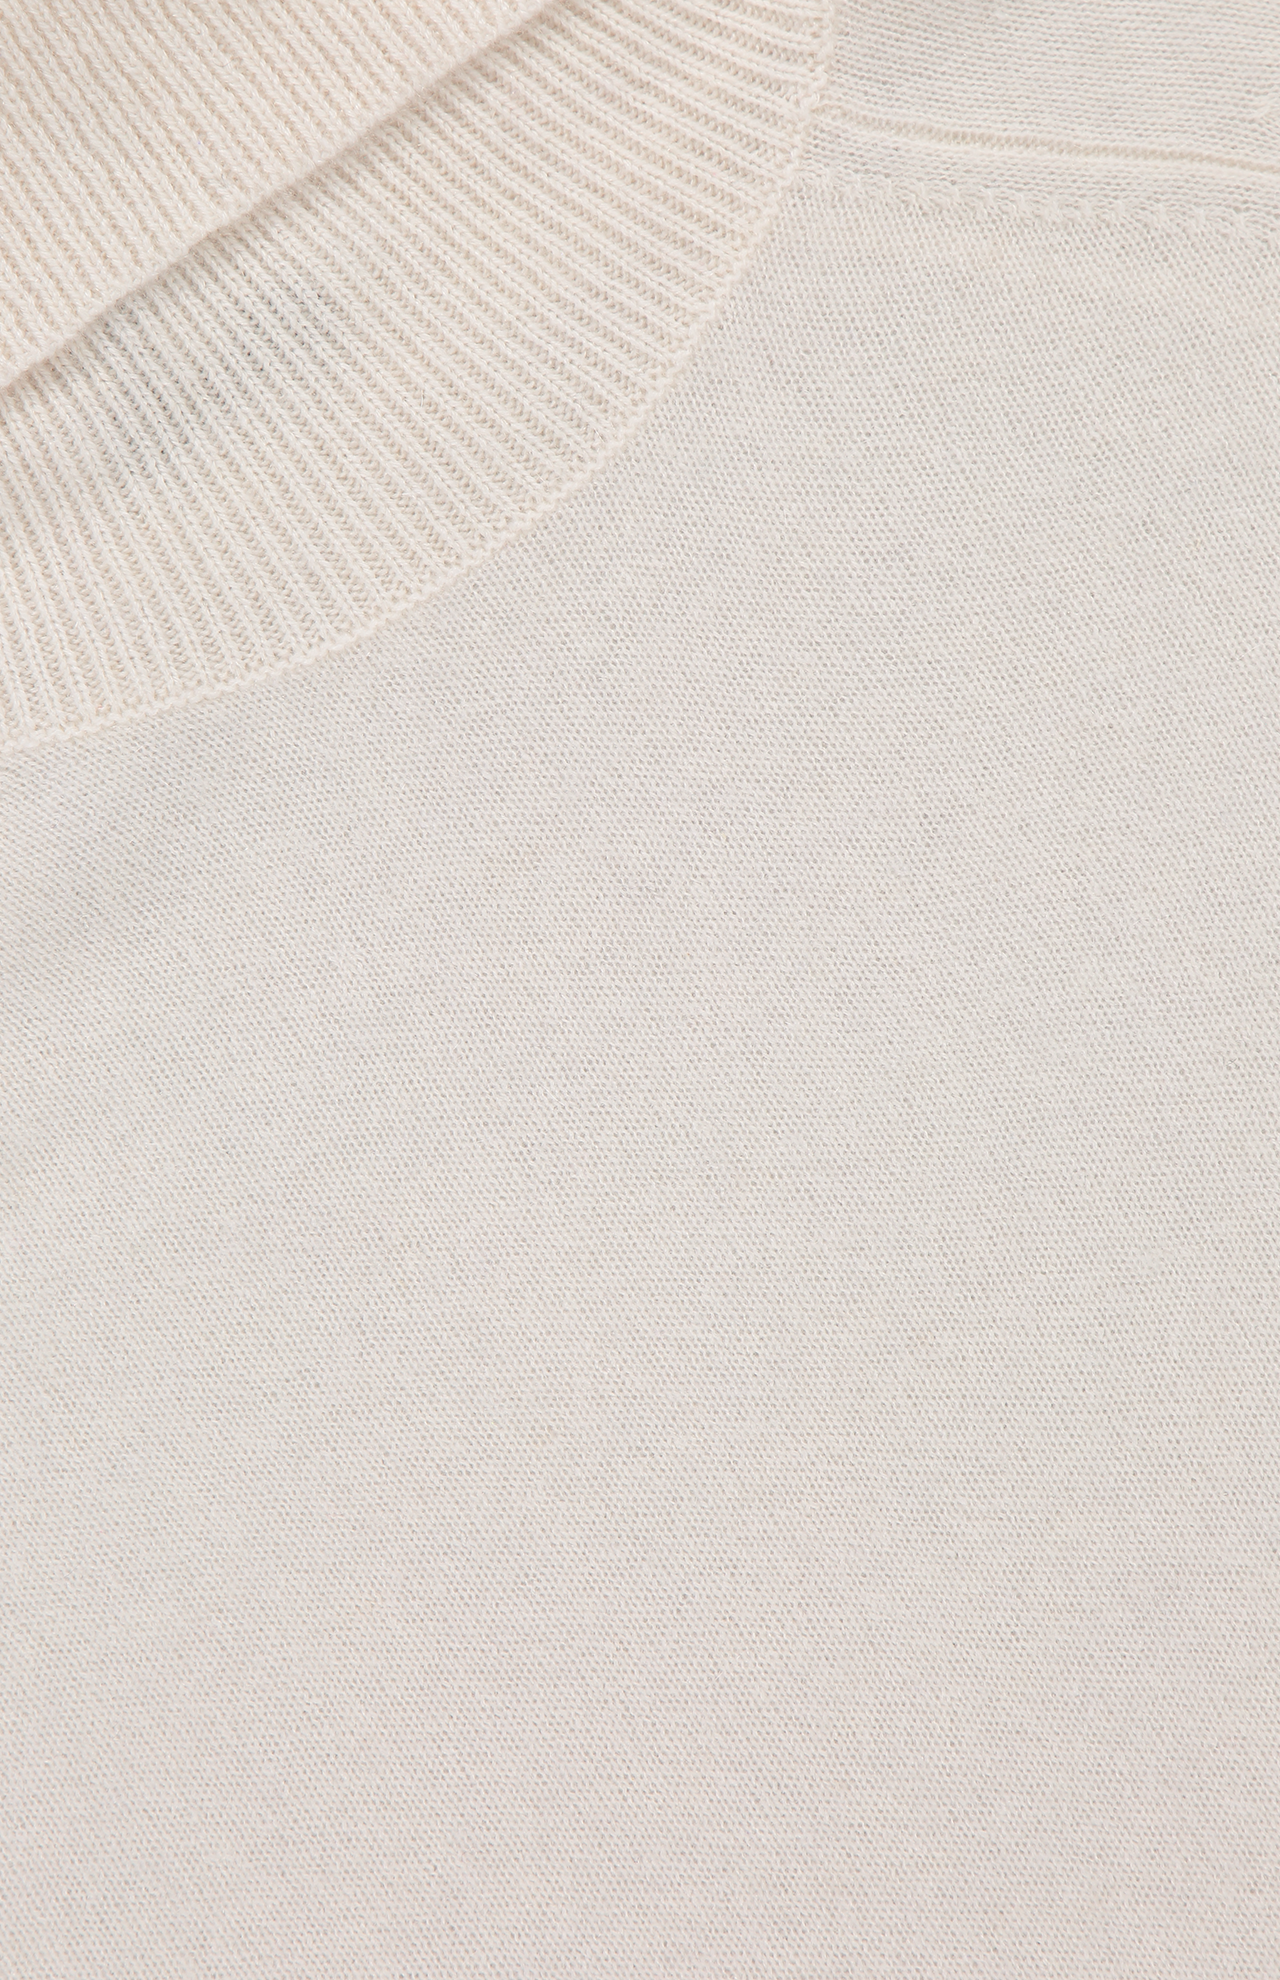 White And Warren Cashmere Essential Turtleneck Sweater Soft White Top Detail Image (6977567096947)